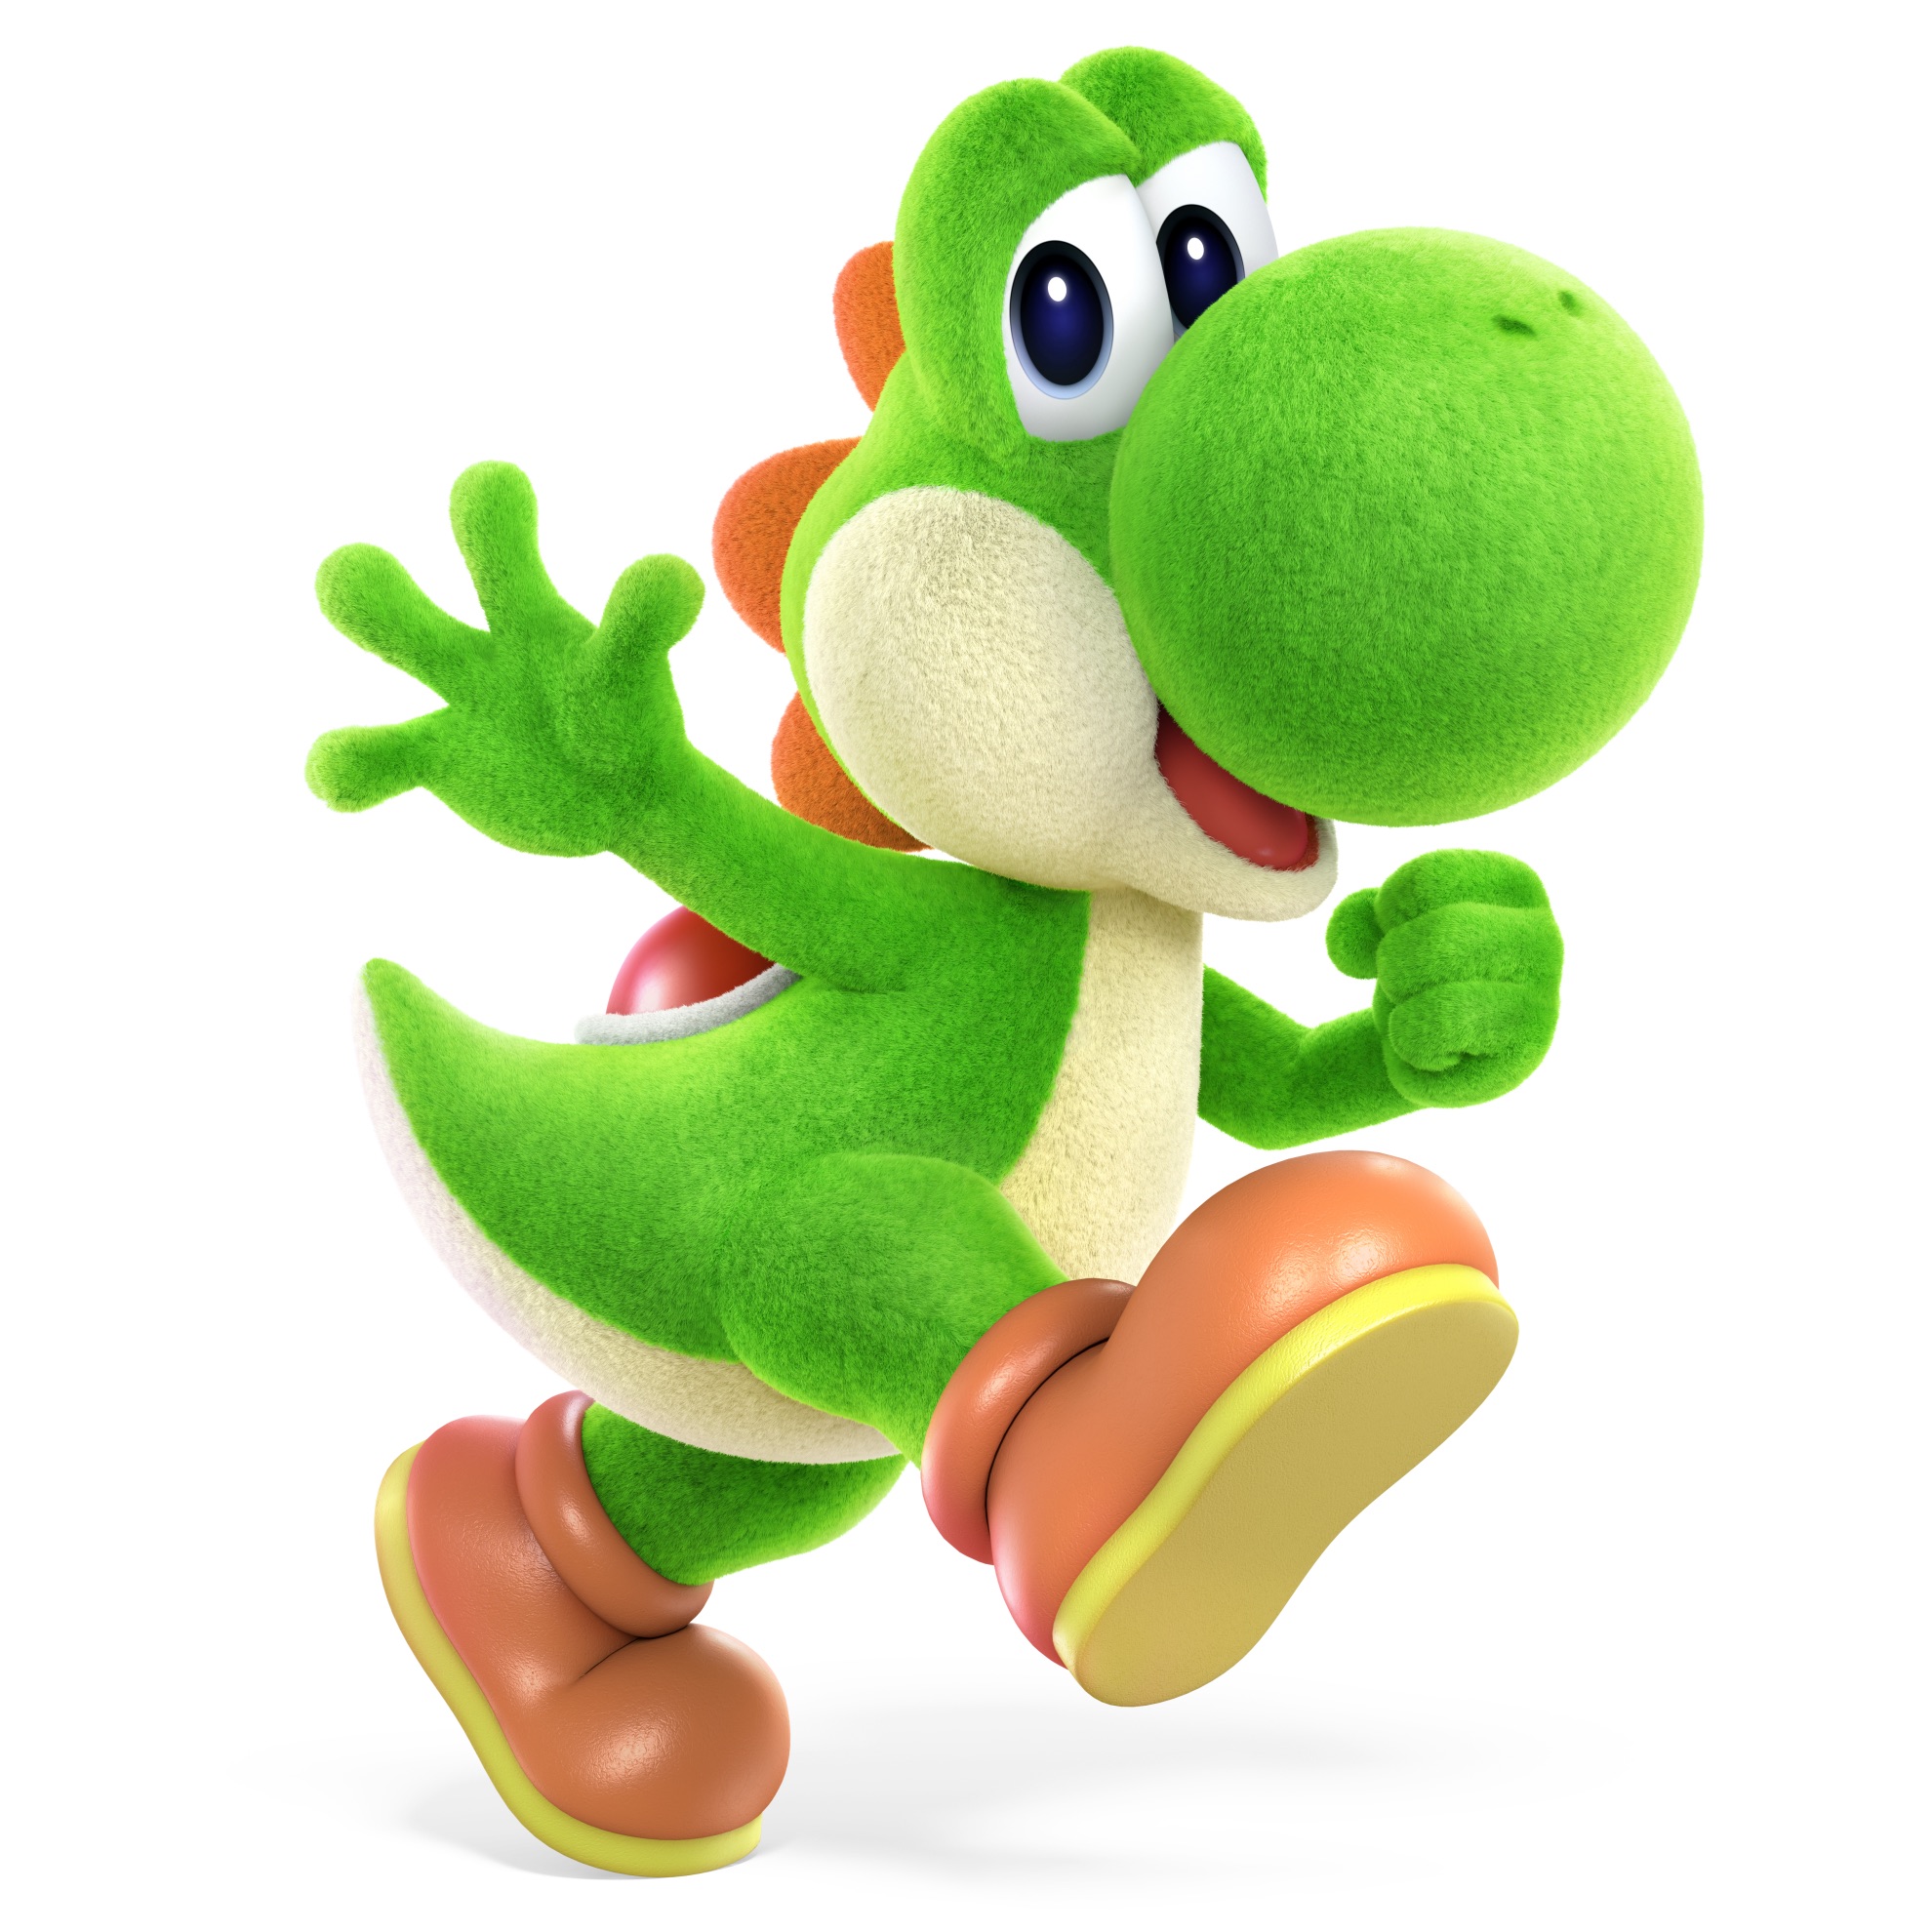 Yoshi's Crafted World Super Smash Bros. Ultimate Character Render